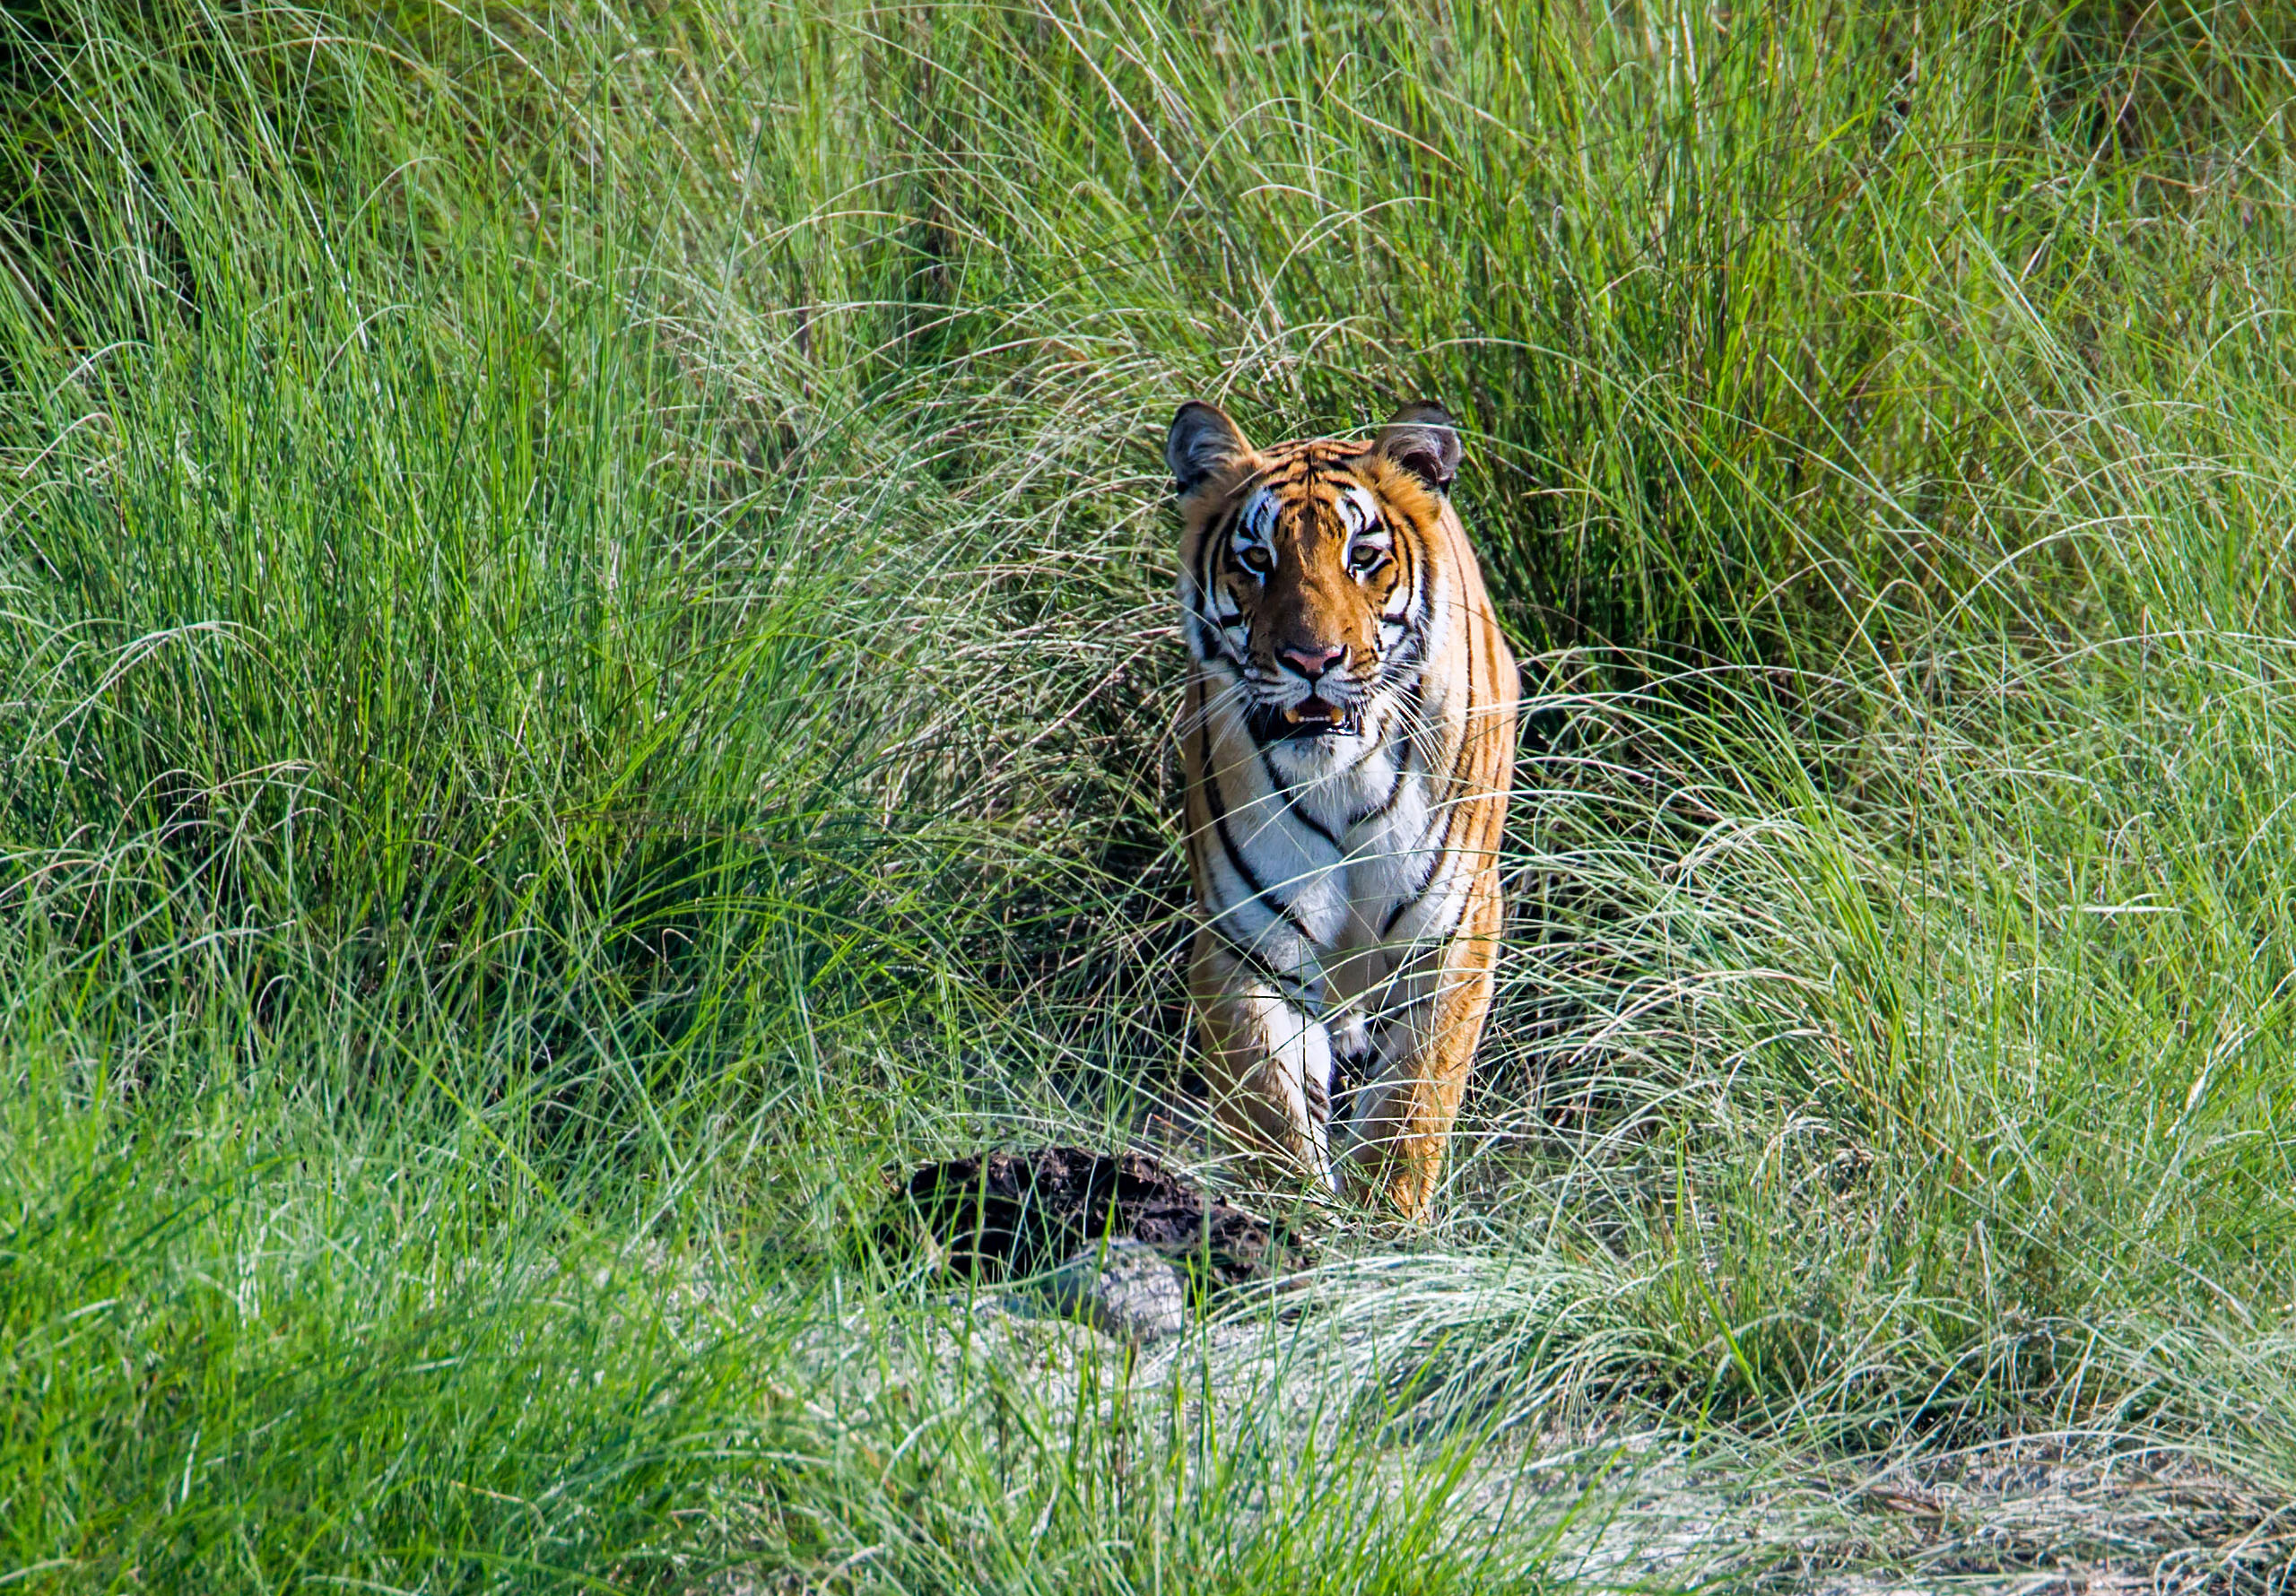 <p>A Bengal tiger in Nepal’s Bardia National Park, home to one of Nepal’s three distinct tiger populations (Image: Marc Anderson / Alamy)</p>